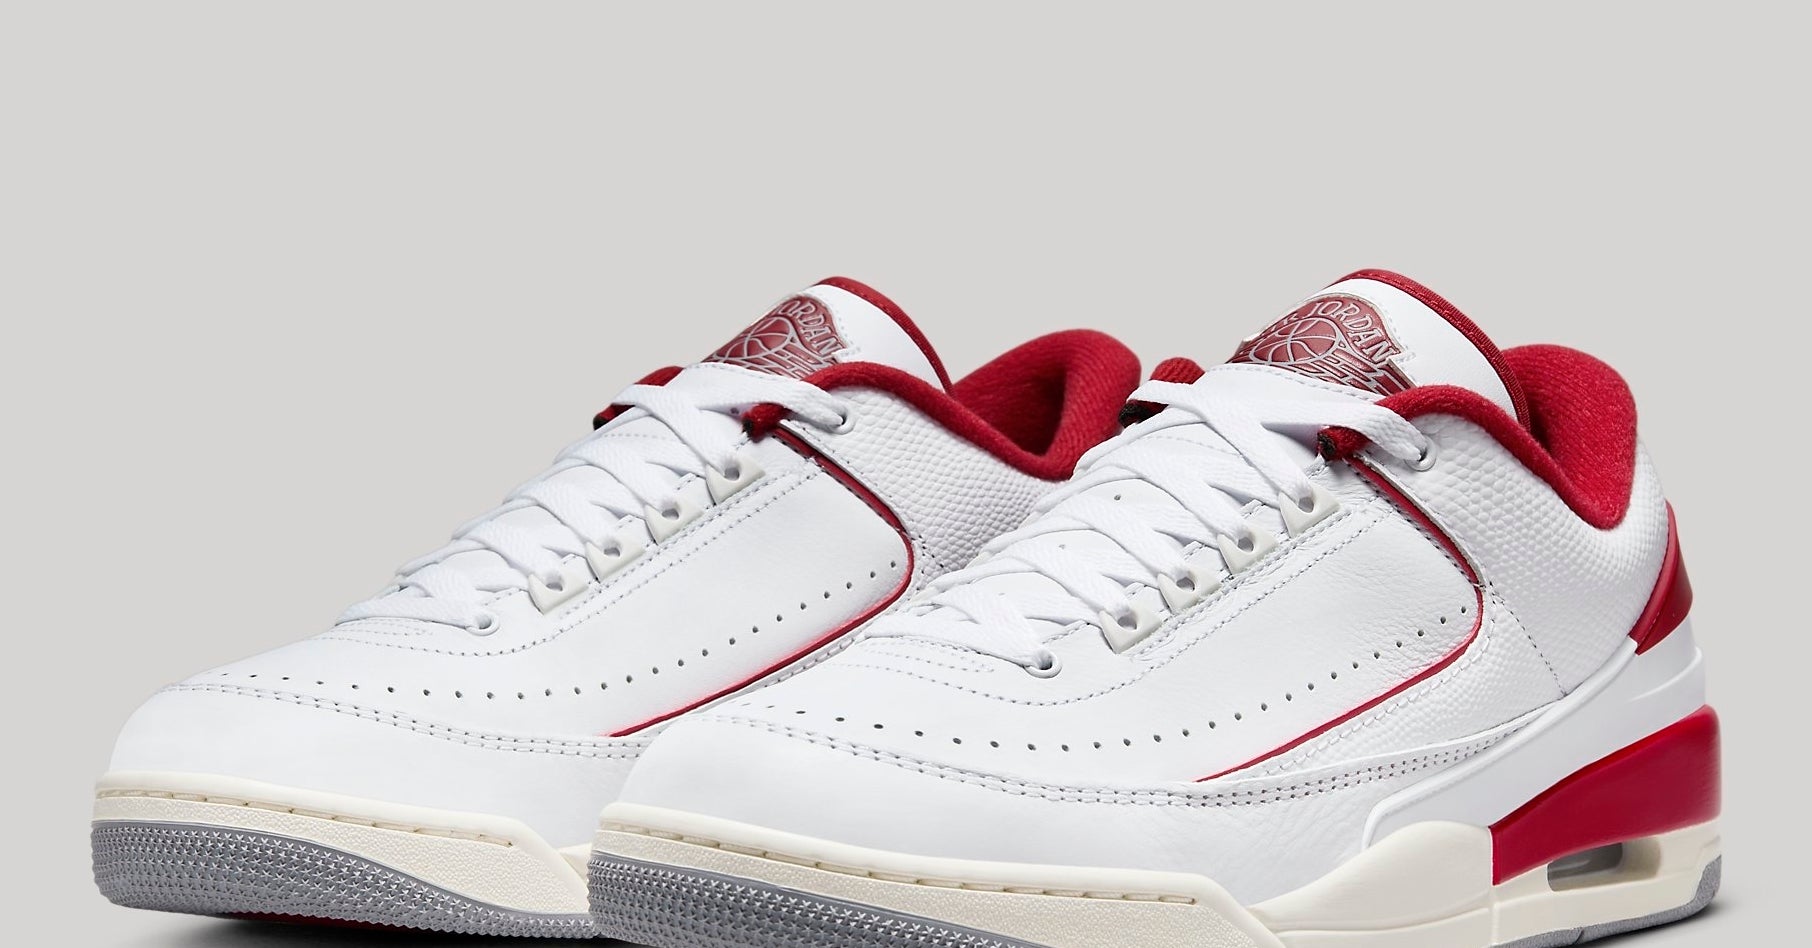 The 'Chicago' Air Jordan 2/3 Hybrid Is Available Now